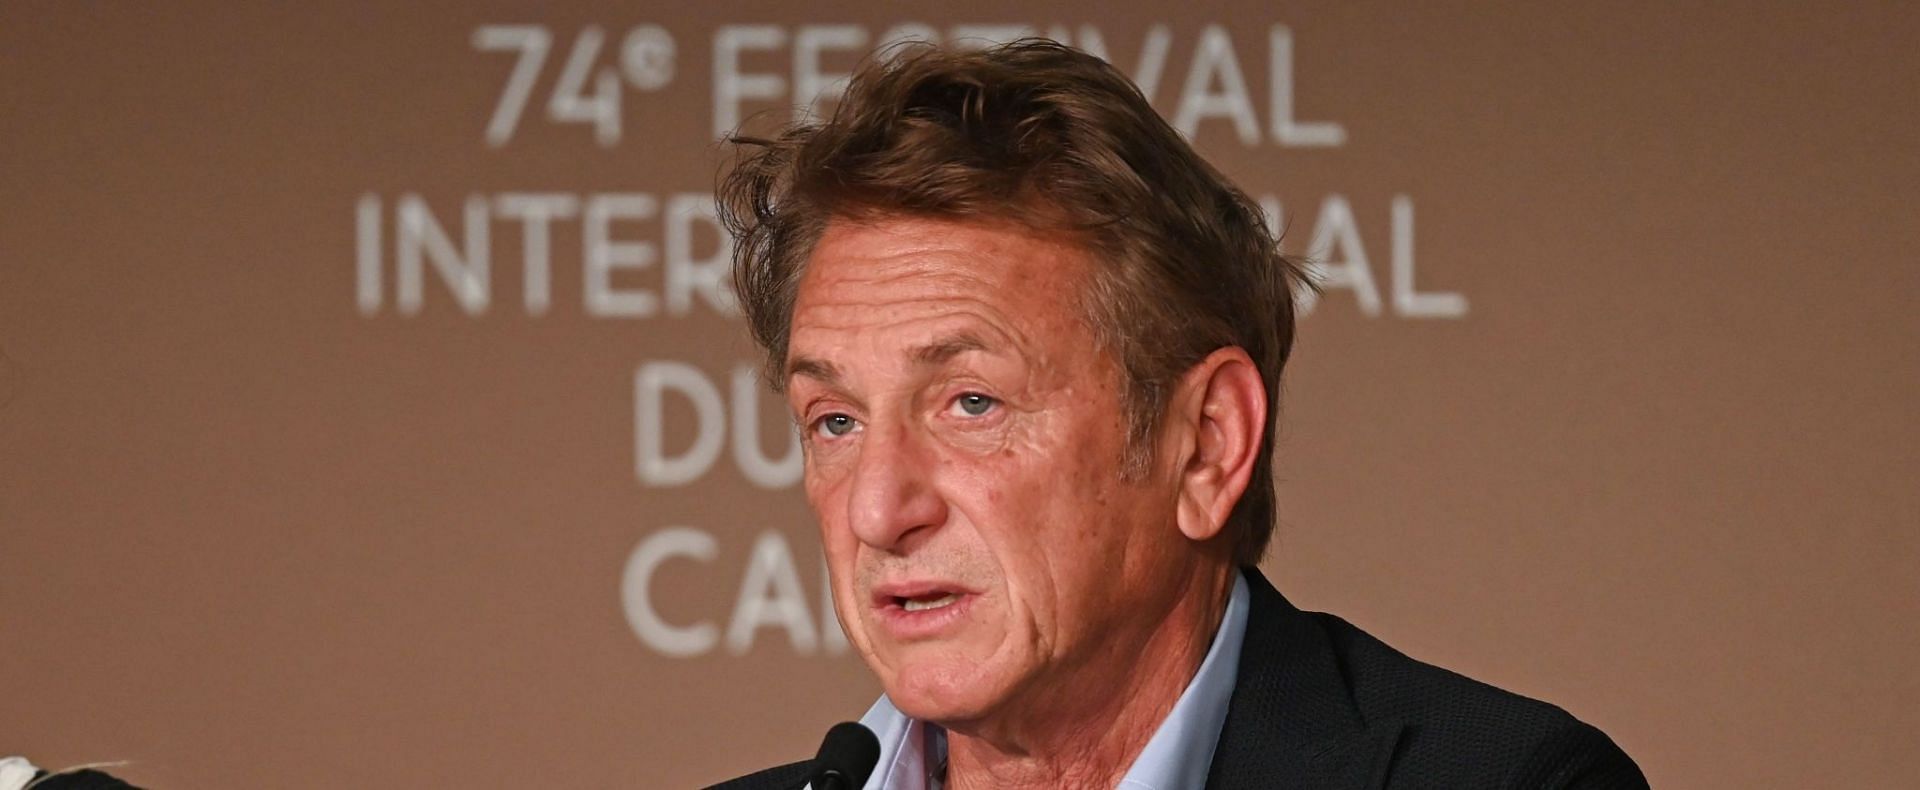 Sean Penn claimed &quot;cowardly genes&quot; are leading to men wearing skirts (Image via Kate Green/Getty Images)